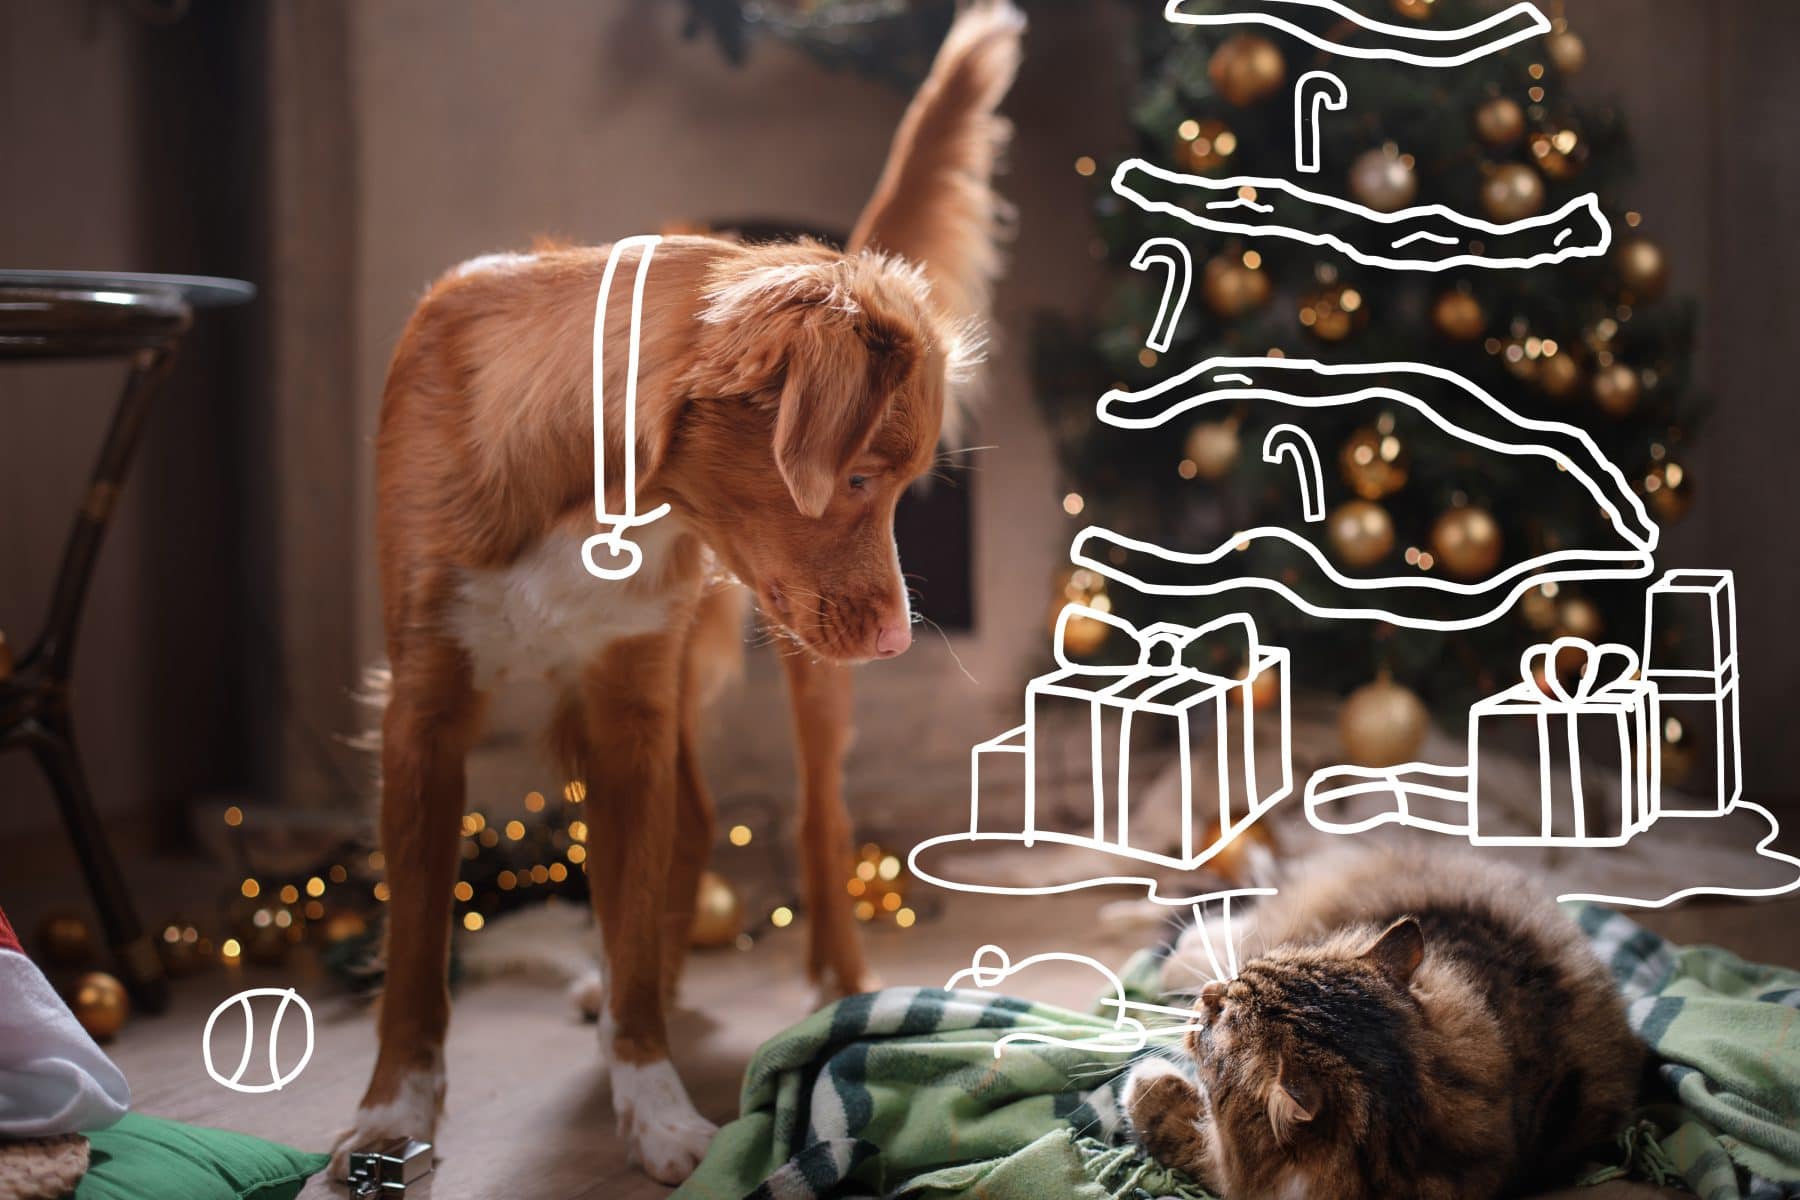 Nova Scotia Duck Tolling Retriever dog and fluffy cat in a room with a fireplace. Yappy Christmas. Christmas with pets.